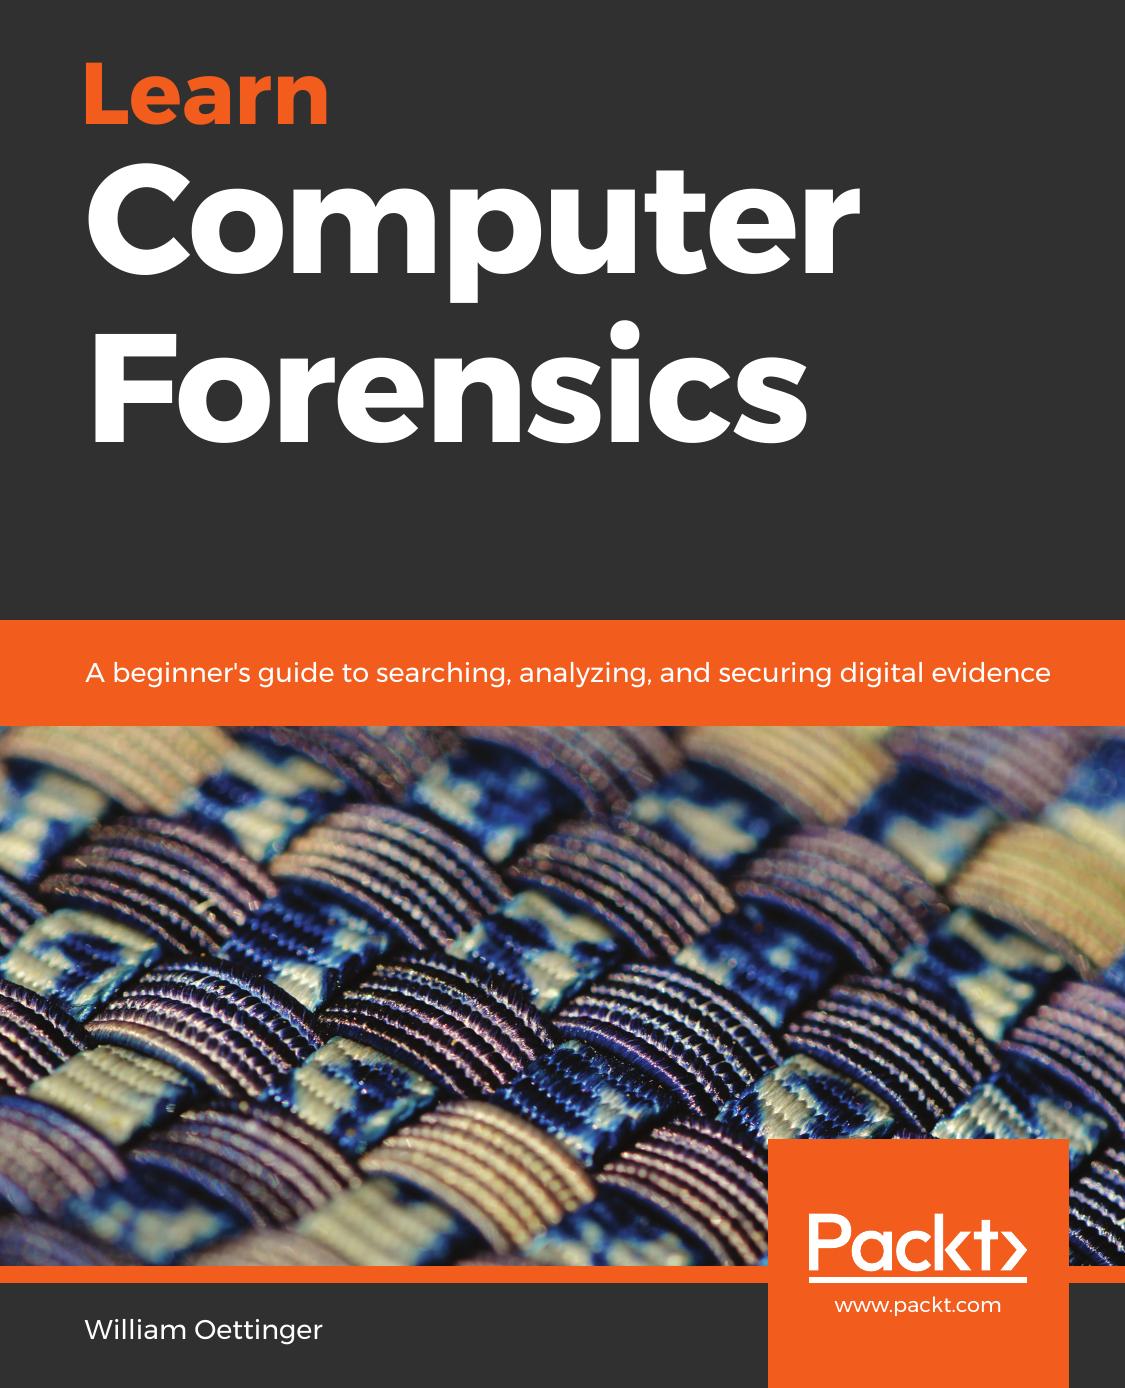 Learn Computer Forensics by William Oettinger